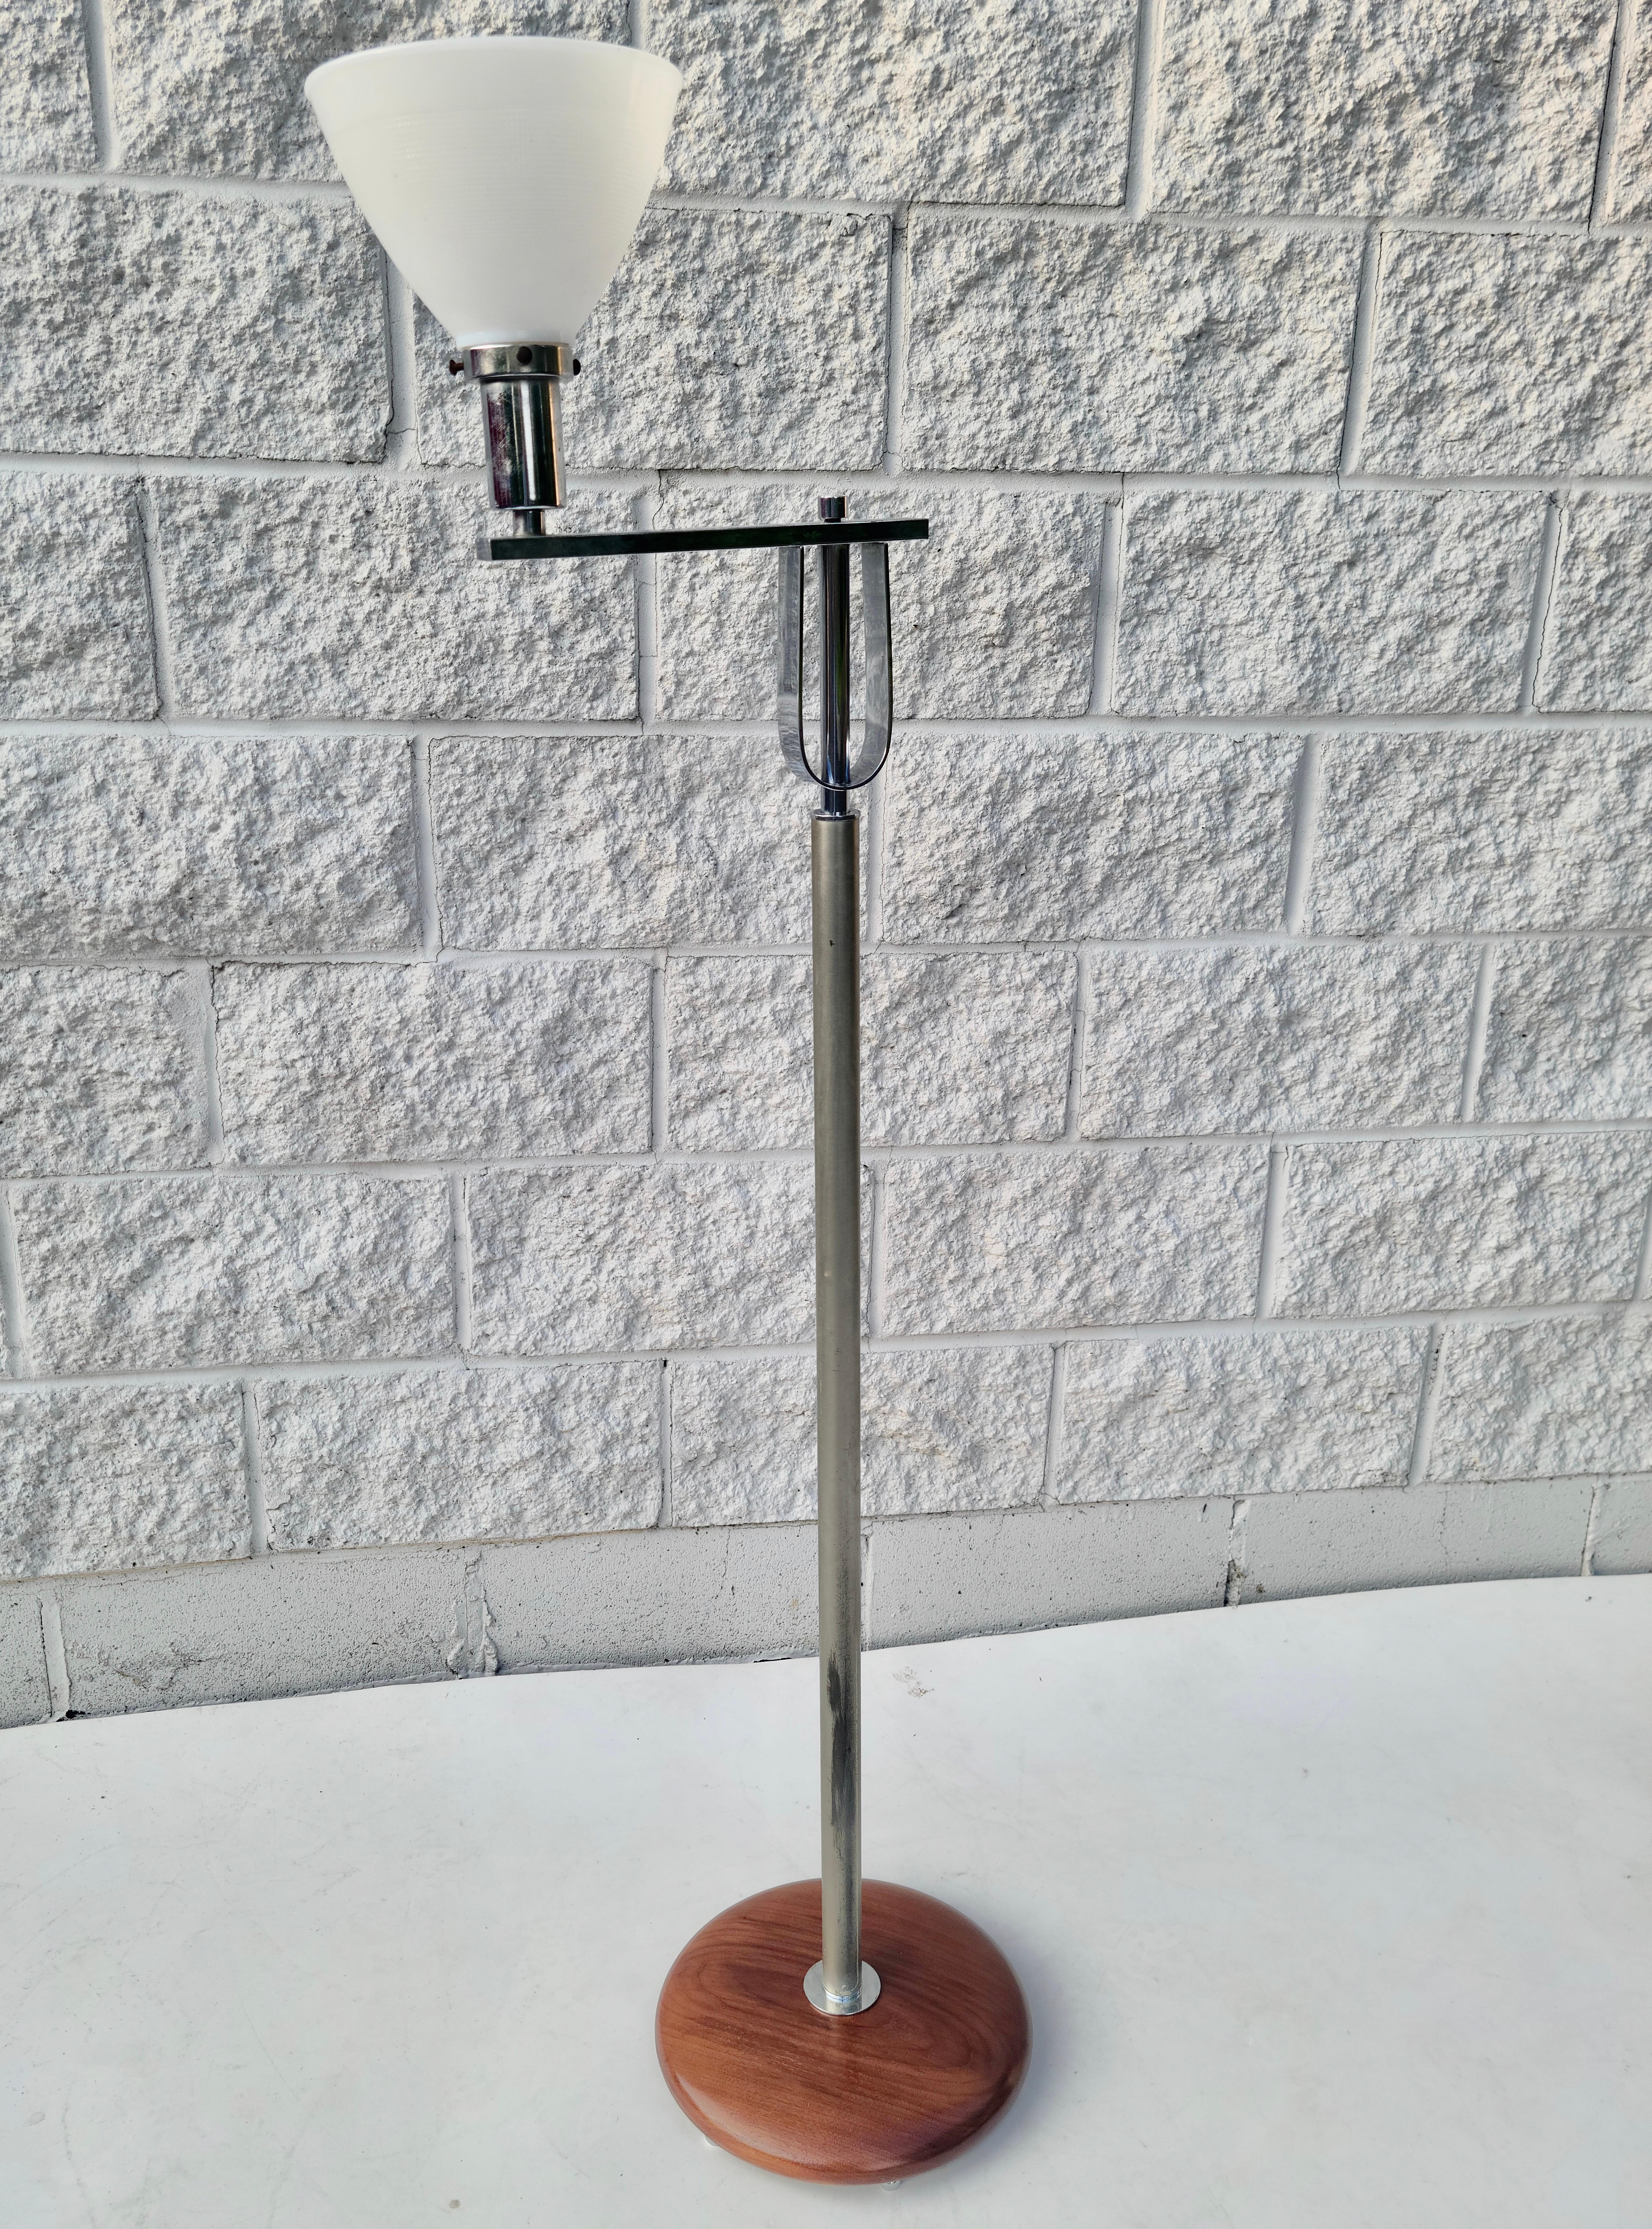 Please feel free to reach out for accurate shipping to your location.

Streamline bridge floor lamp.

Has milk glass diffuser.
No shade. 

Walnut disc base has been repaired and refinished.
Chrome and steel components have been cleaned for minimally